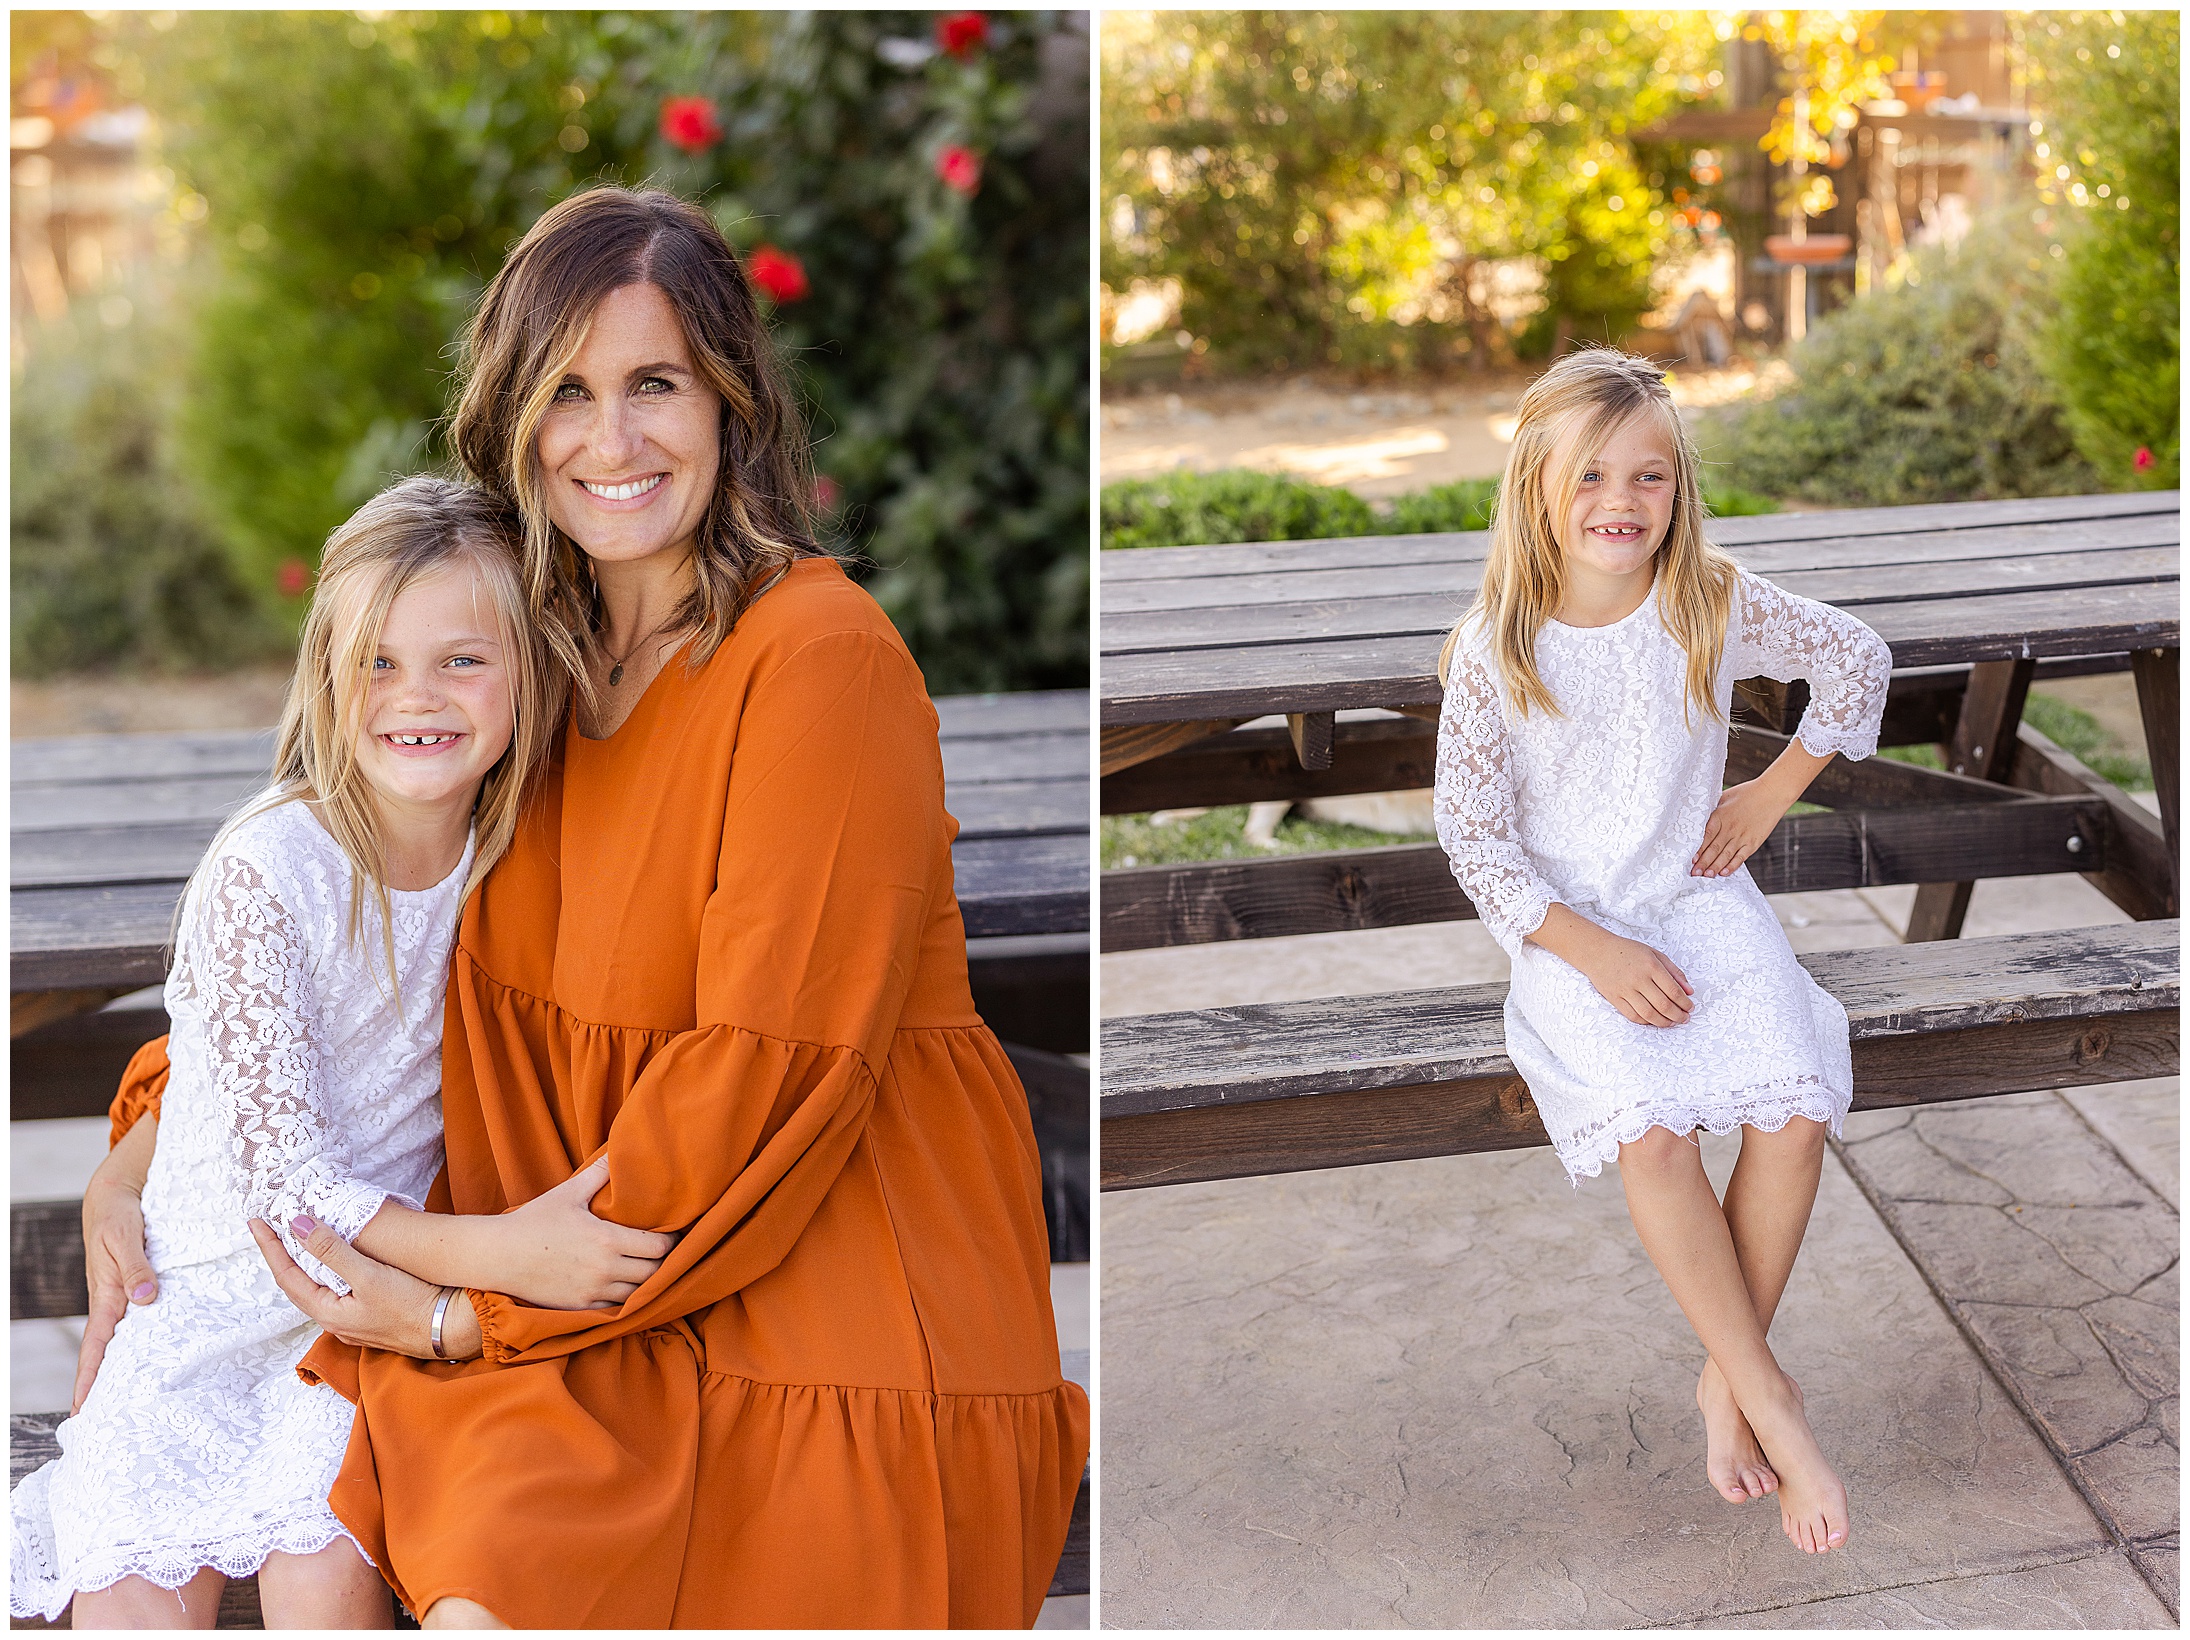 Country Home Family Portraits Fall October Orange Dress Picnic Bench,